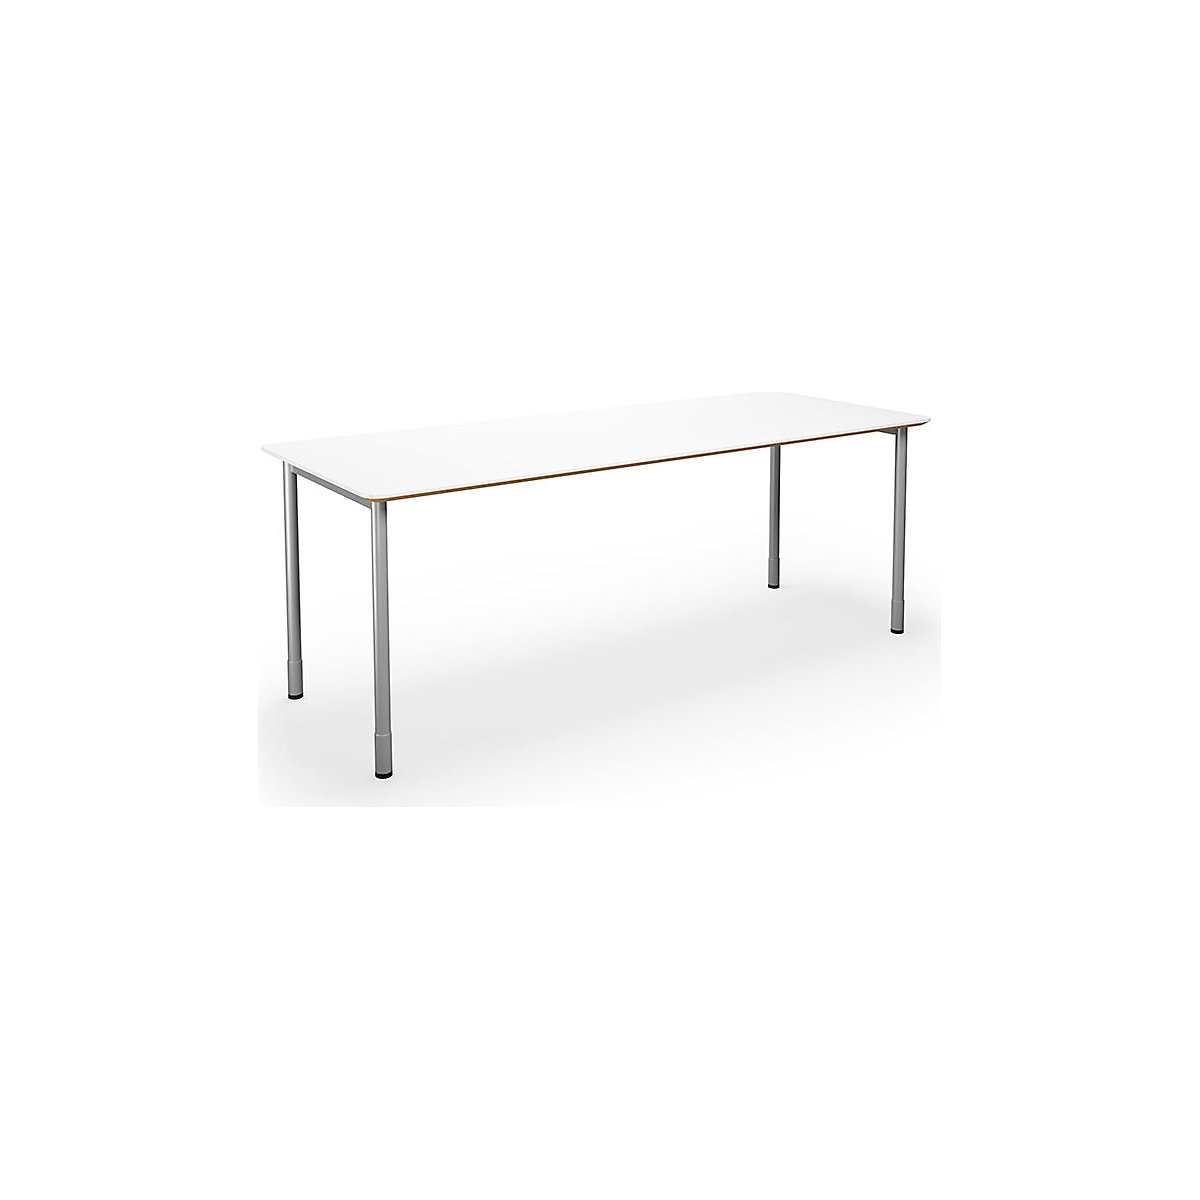 DUO-C Trend multi-purpose desk, straight tabletop, rounded corners, WxD 1800 x 800 mm, white, silver-5